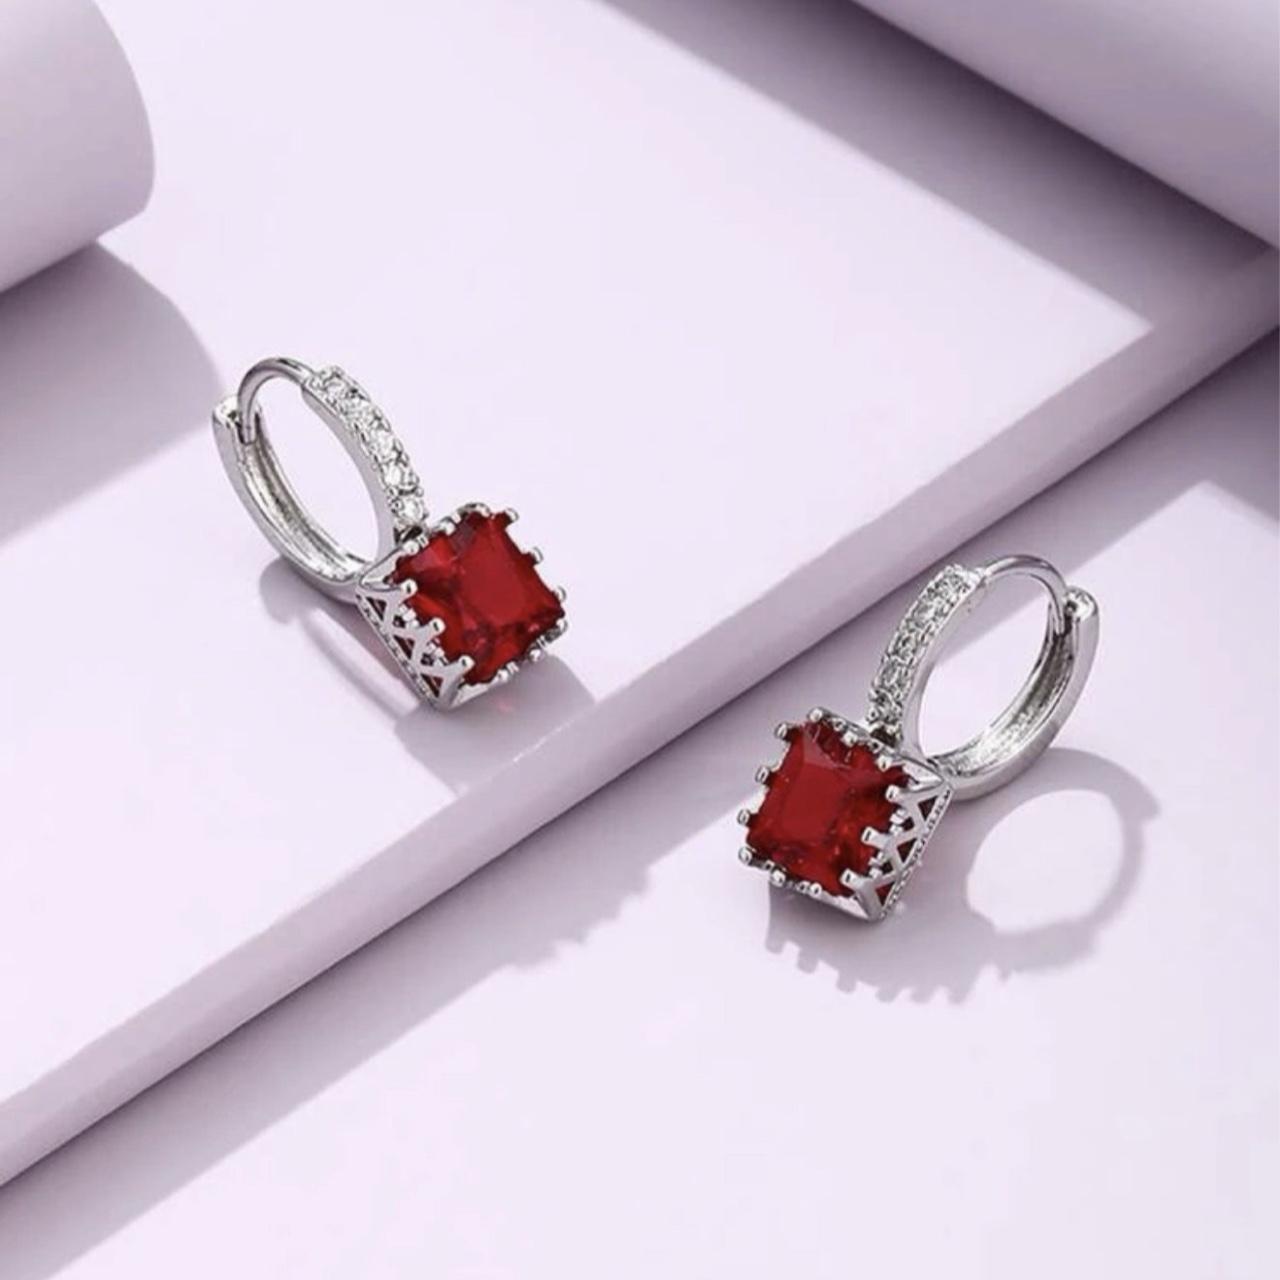 Product Image 3 - New. Red gemstone earrings .